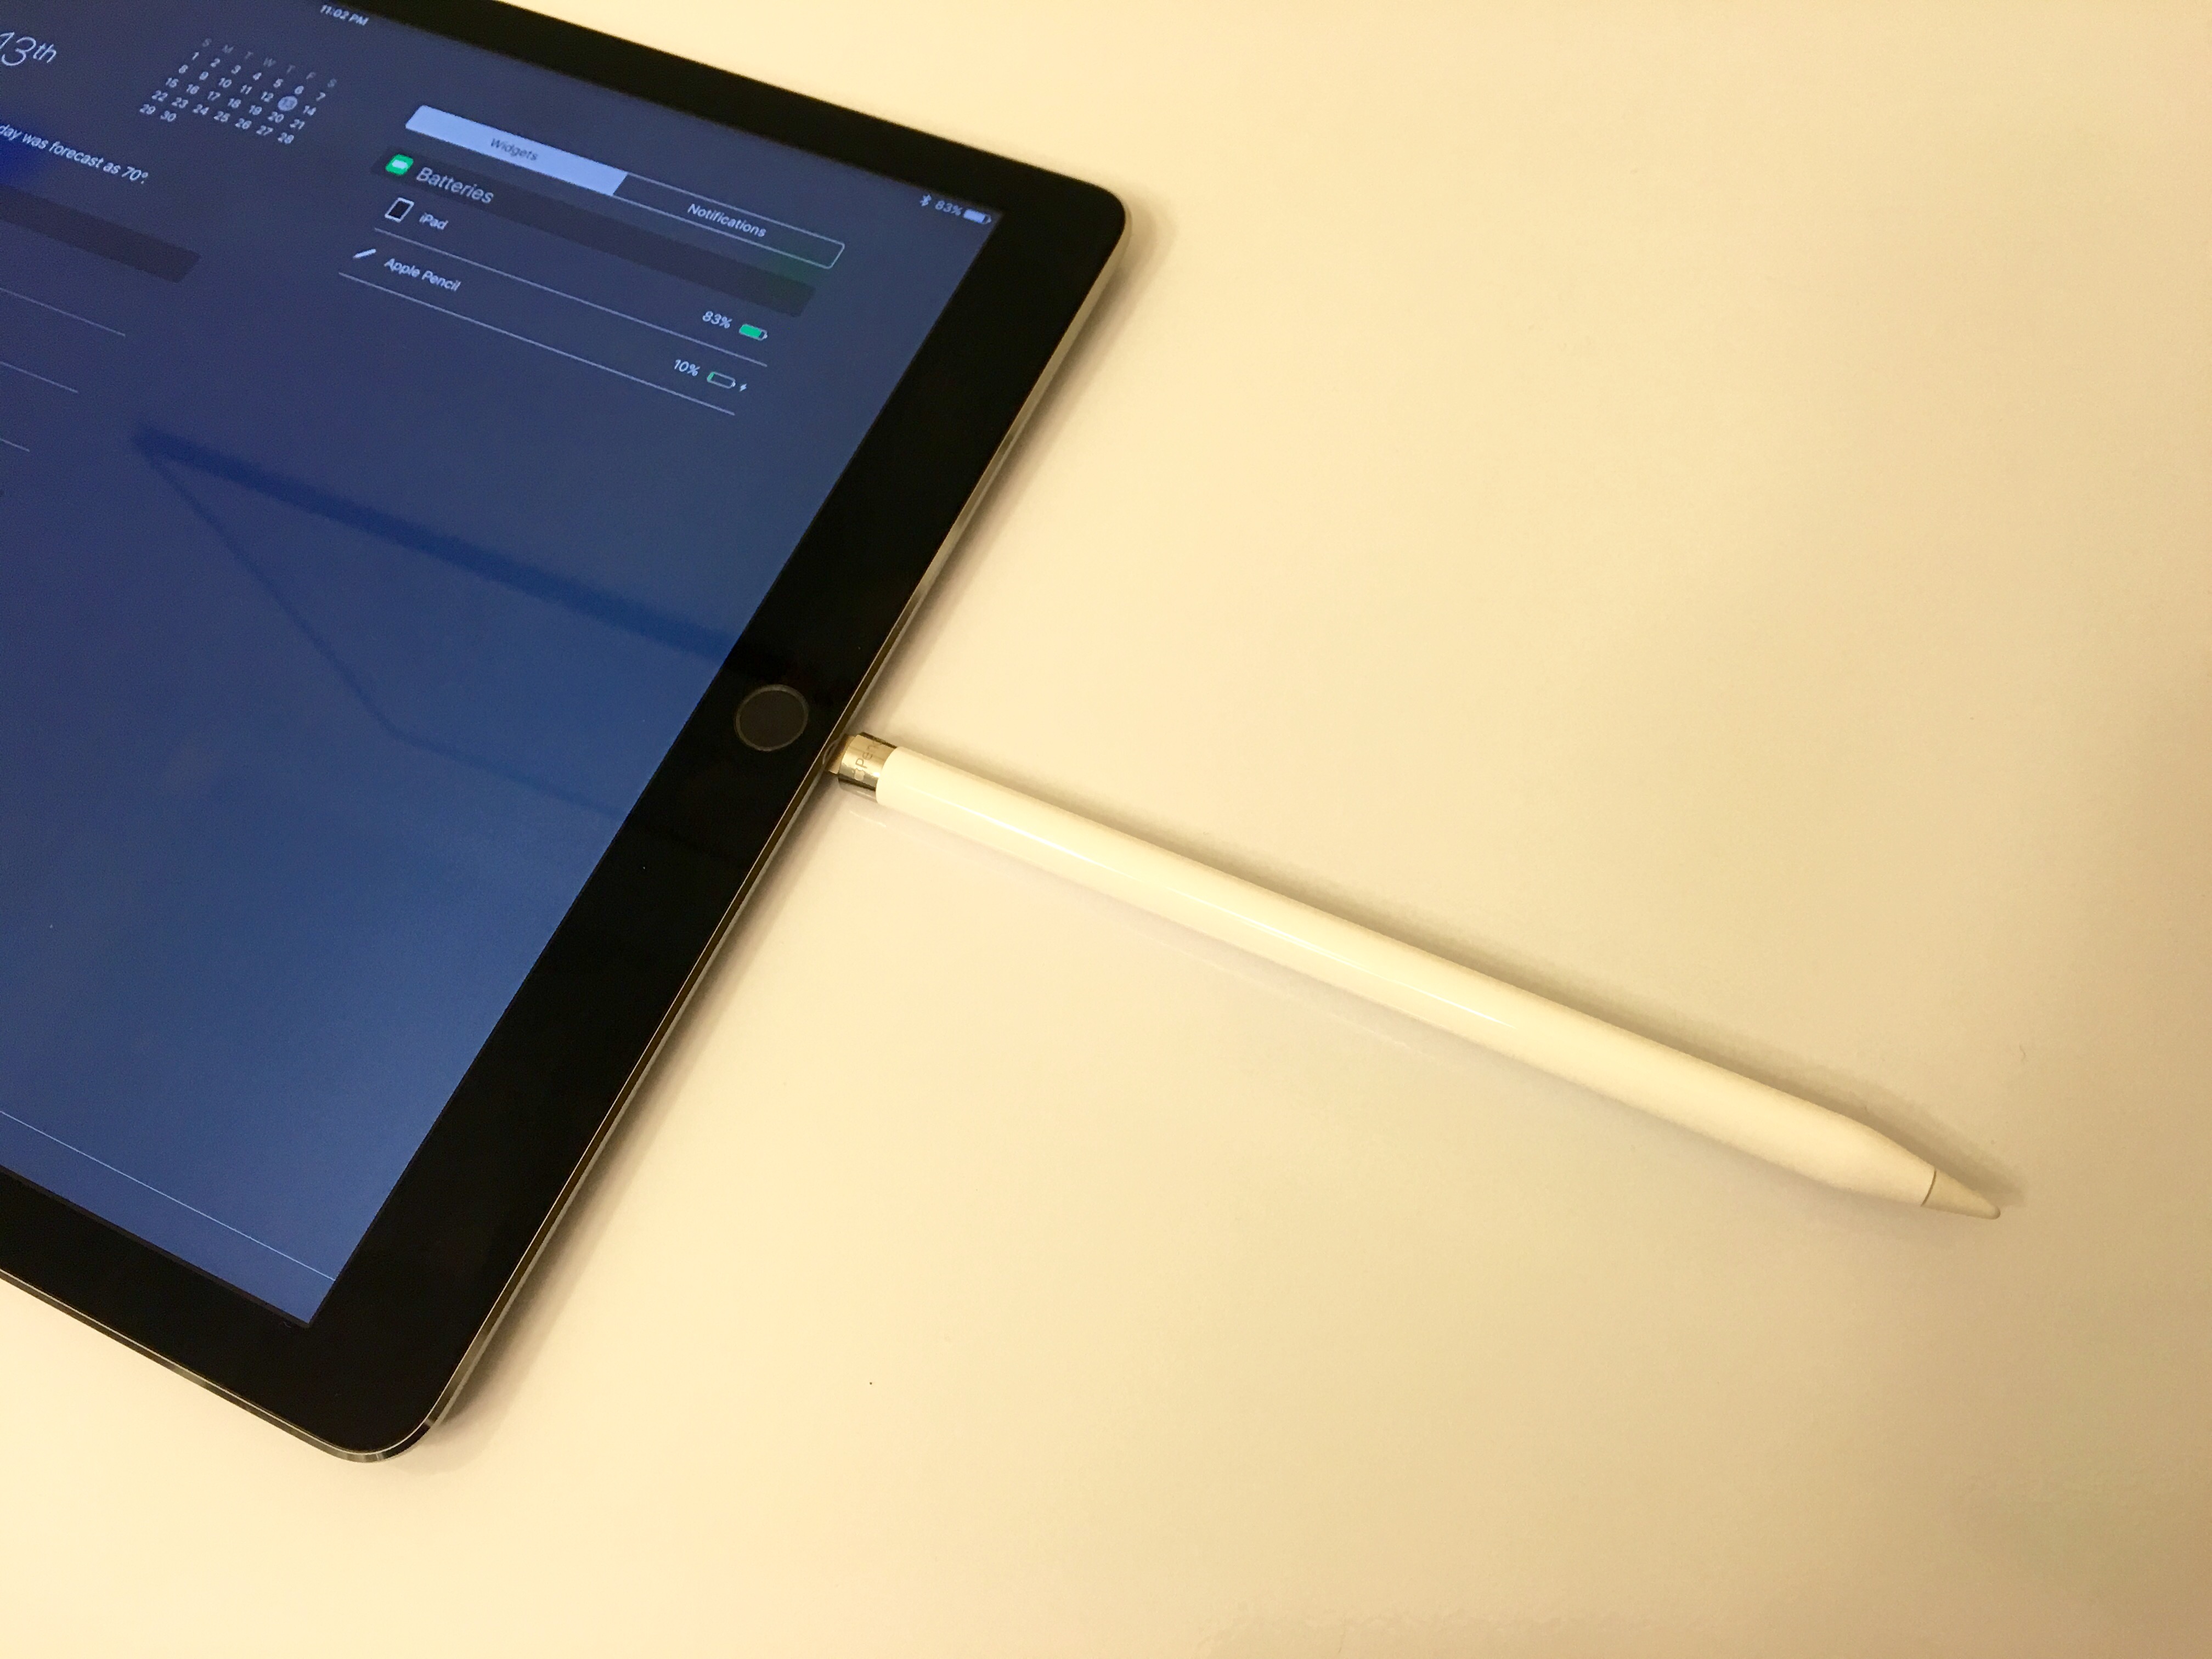 Apple Pencil hands-on 2